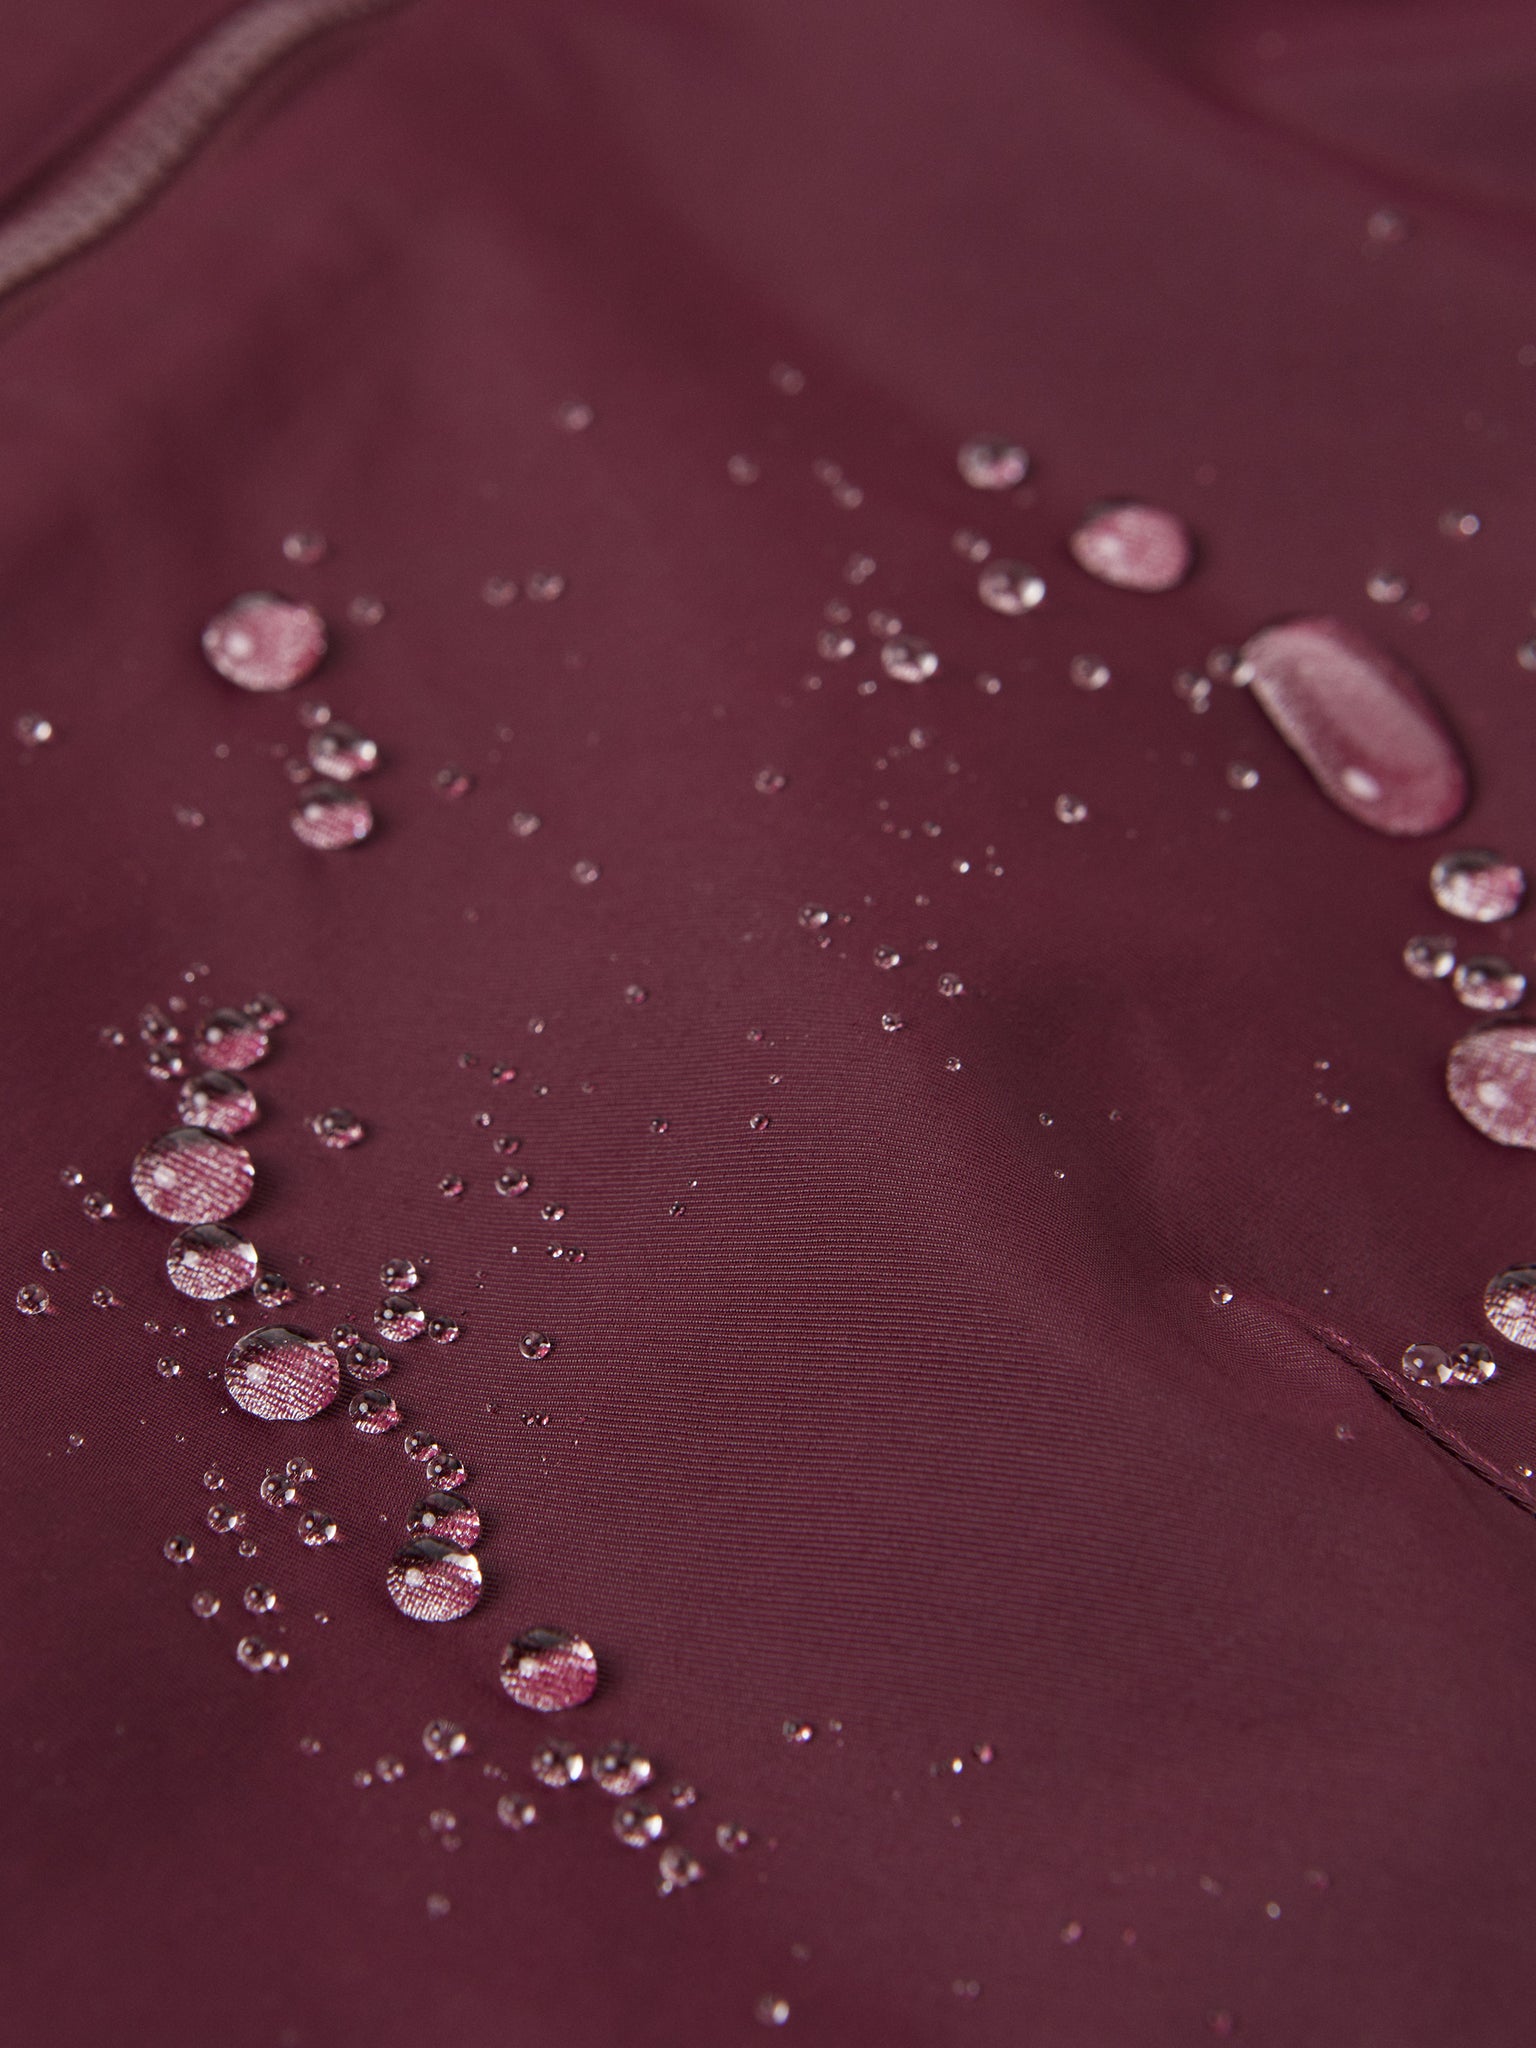 Burgundy Adult Waterproof Shell Jacket from the Polarn O. Pyret outerwear collection. The best ethical kids outerwear.